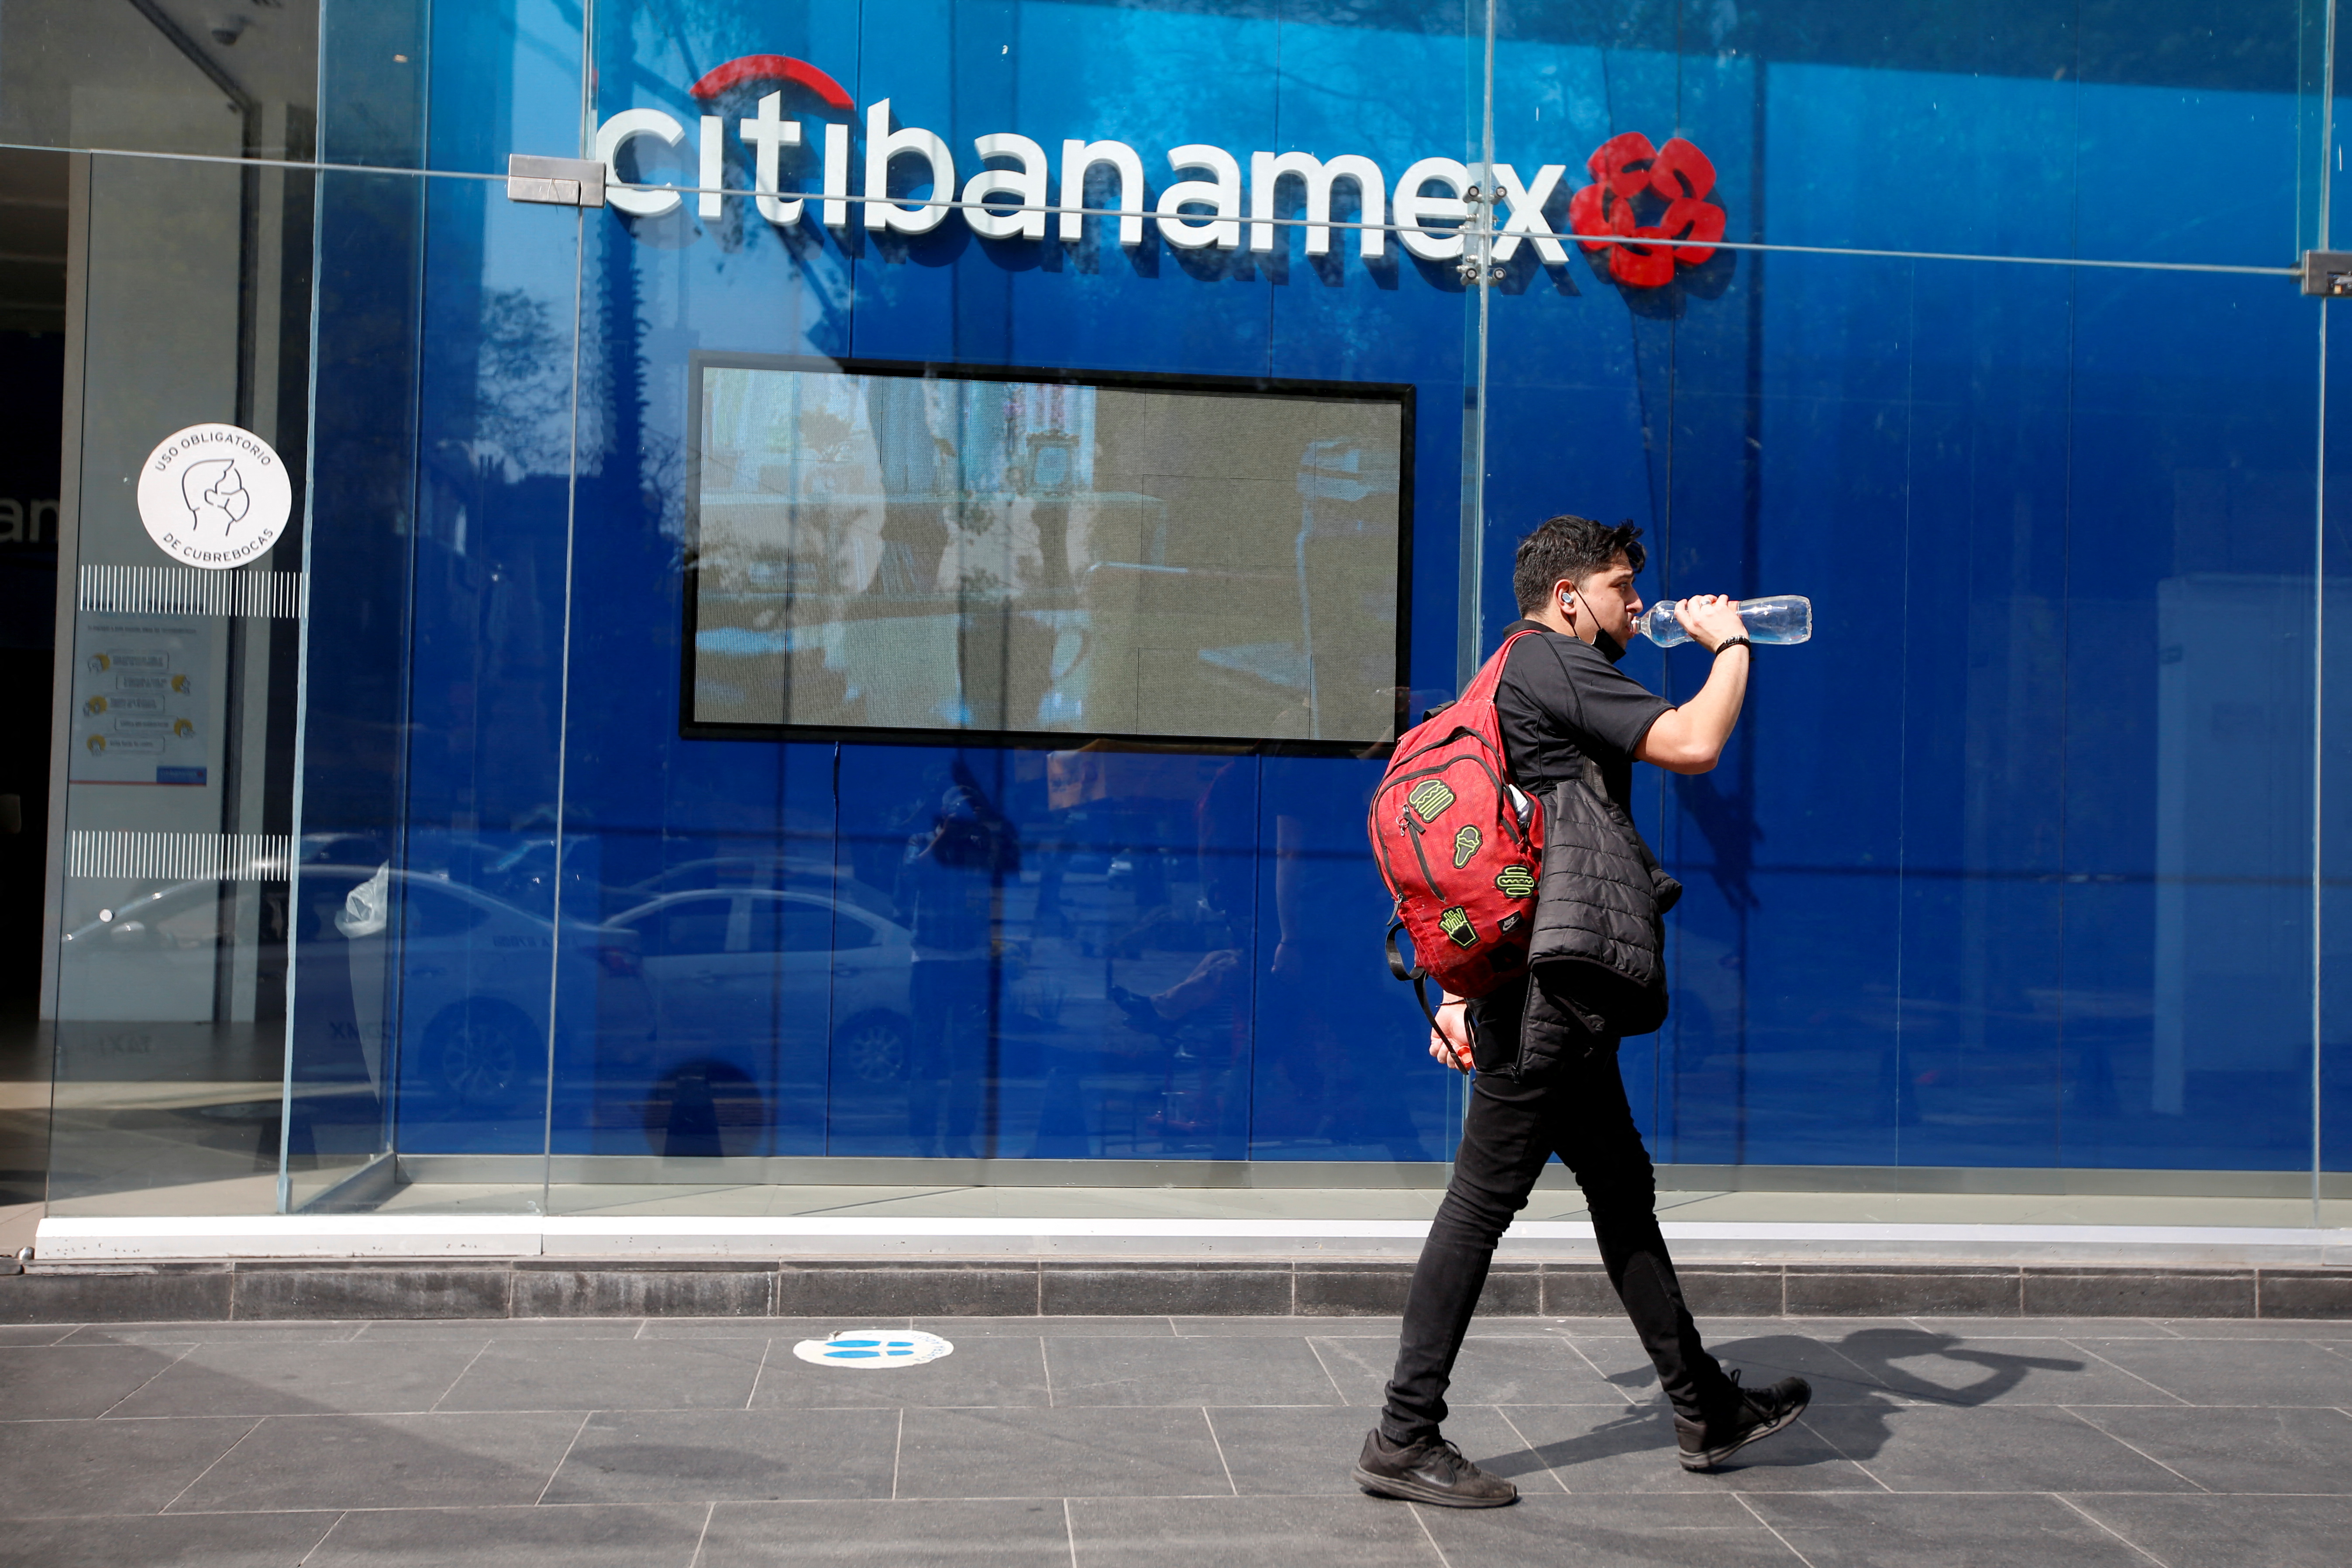 A man walks past a Citibanamex bank branch in Mexico City